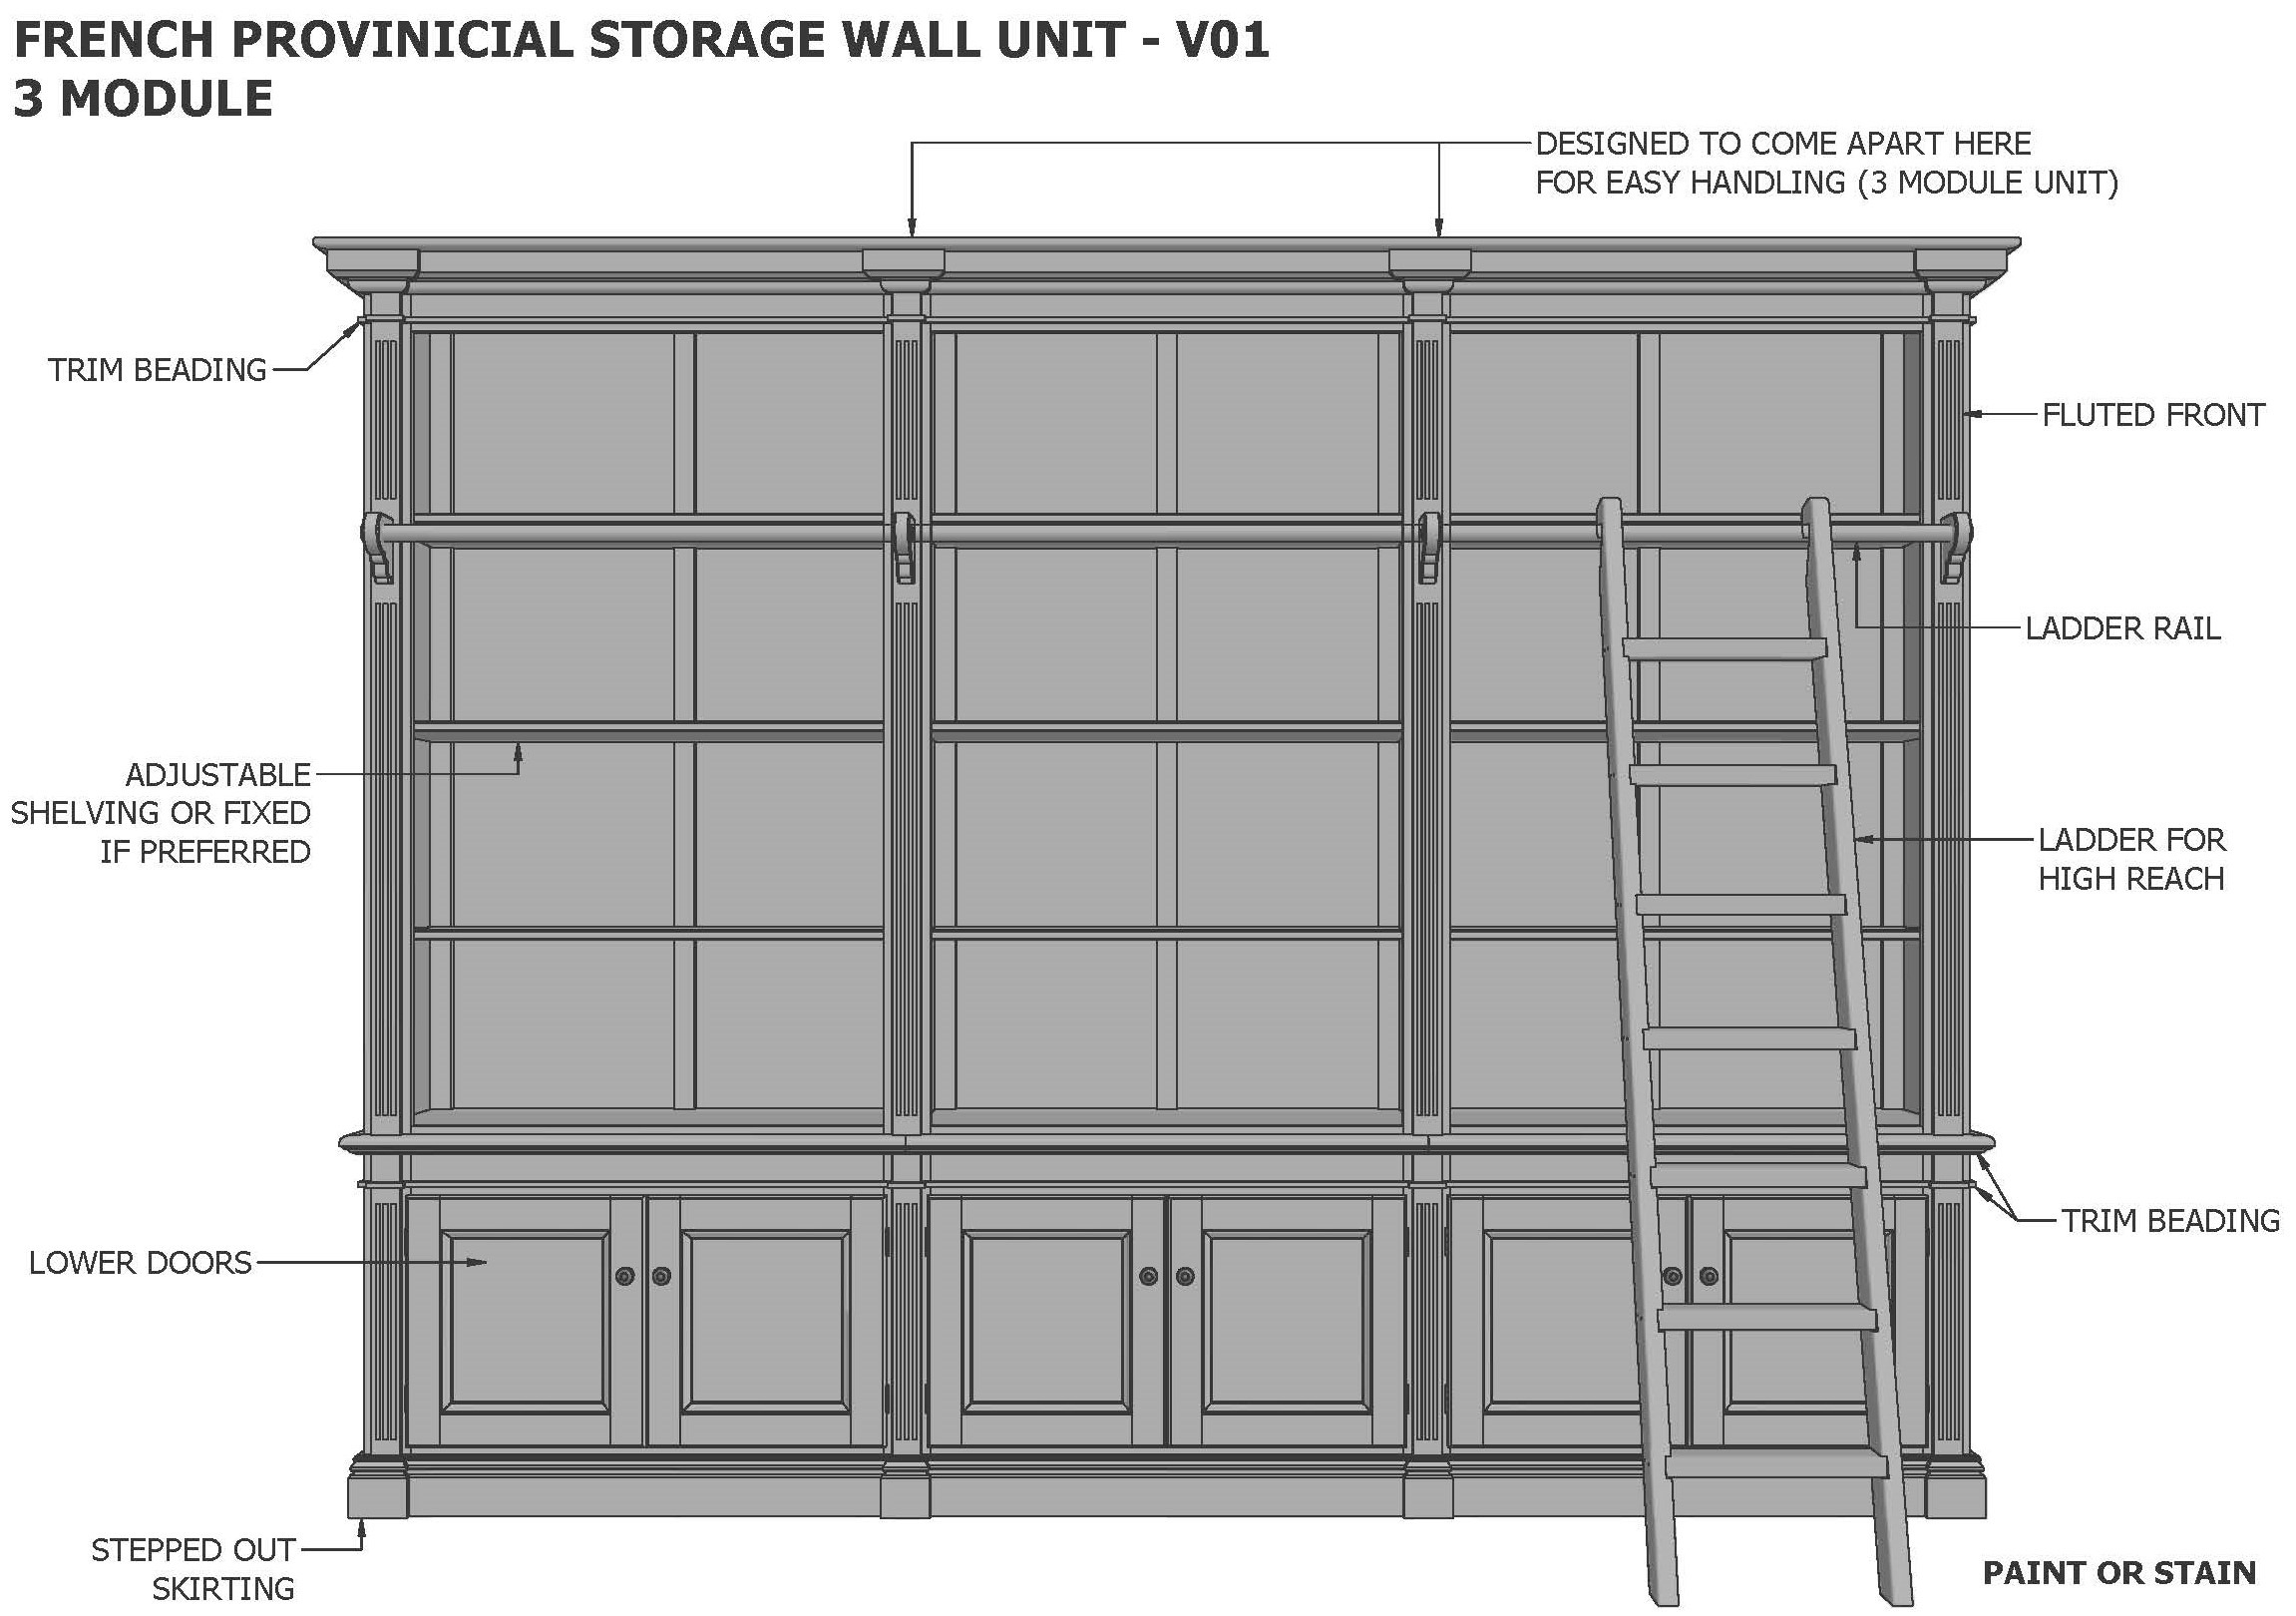 FRENCH PROVINCIAL WALL UNIT 3 MODULE (Building Plans ONLY)